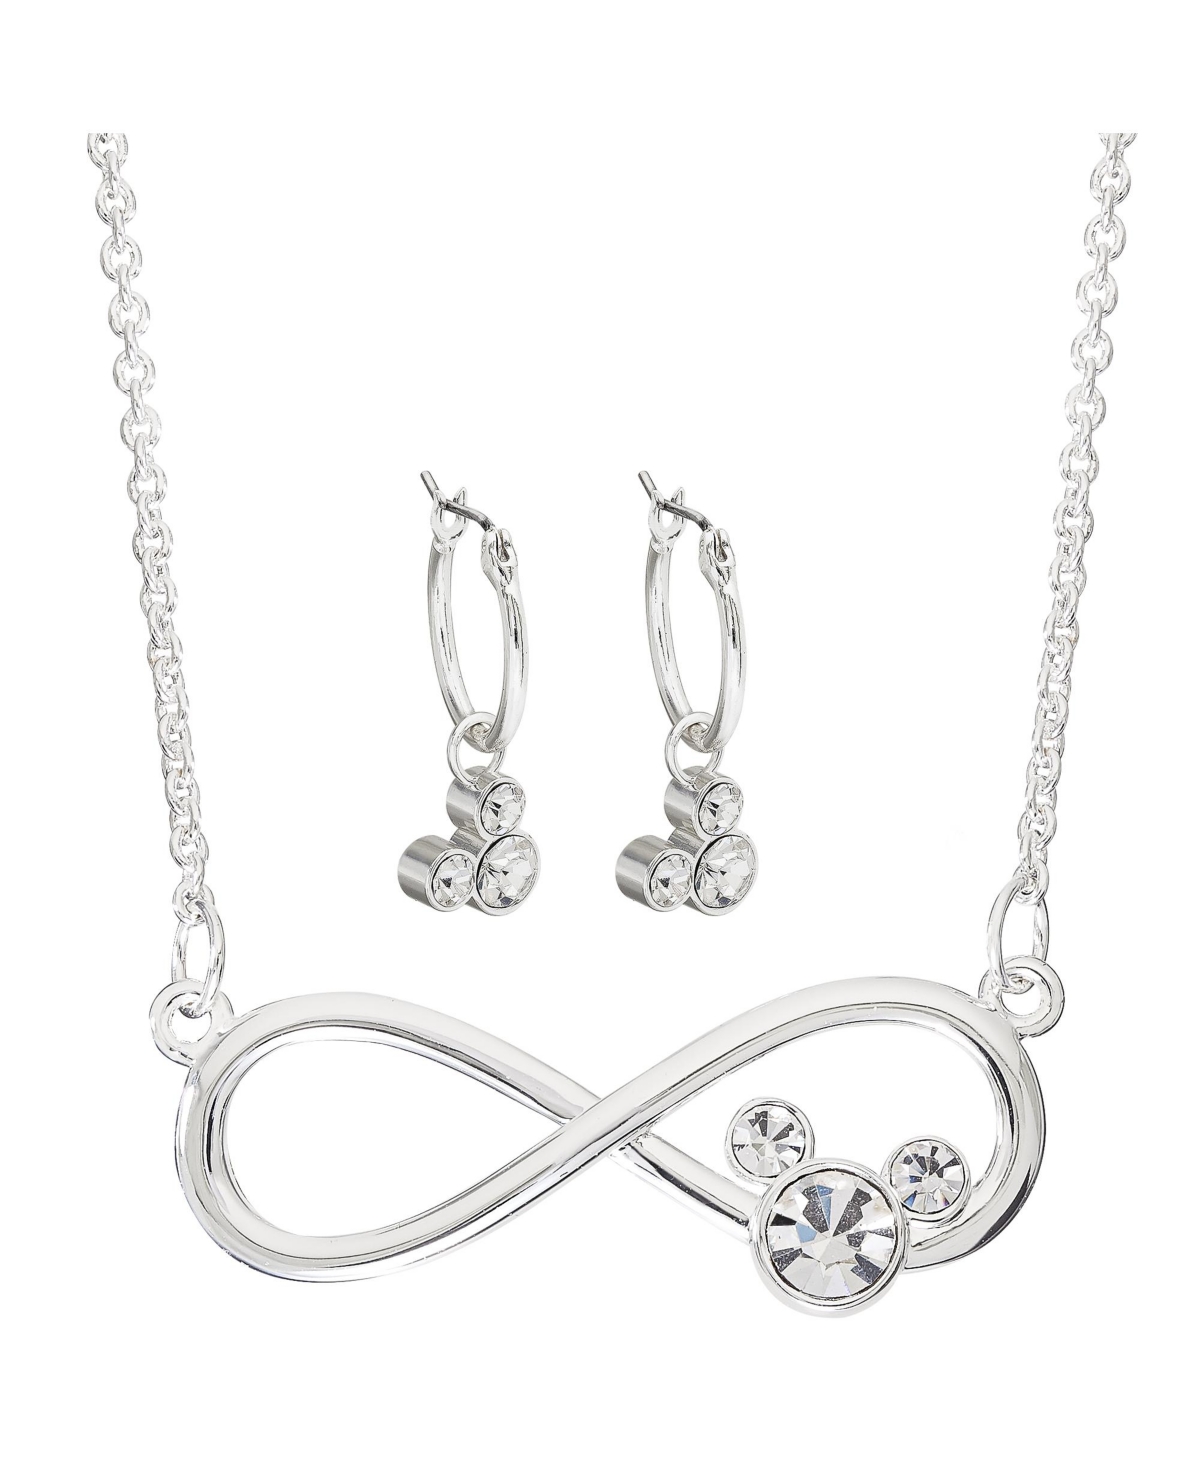 Mickey Mouse Womens Infinity Necklace and Hoop Dangle Earrings Set, Silver Plated Crystal Accents - 18" - Silver tone